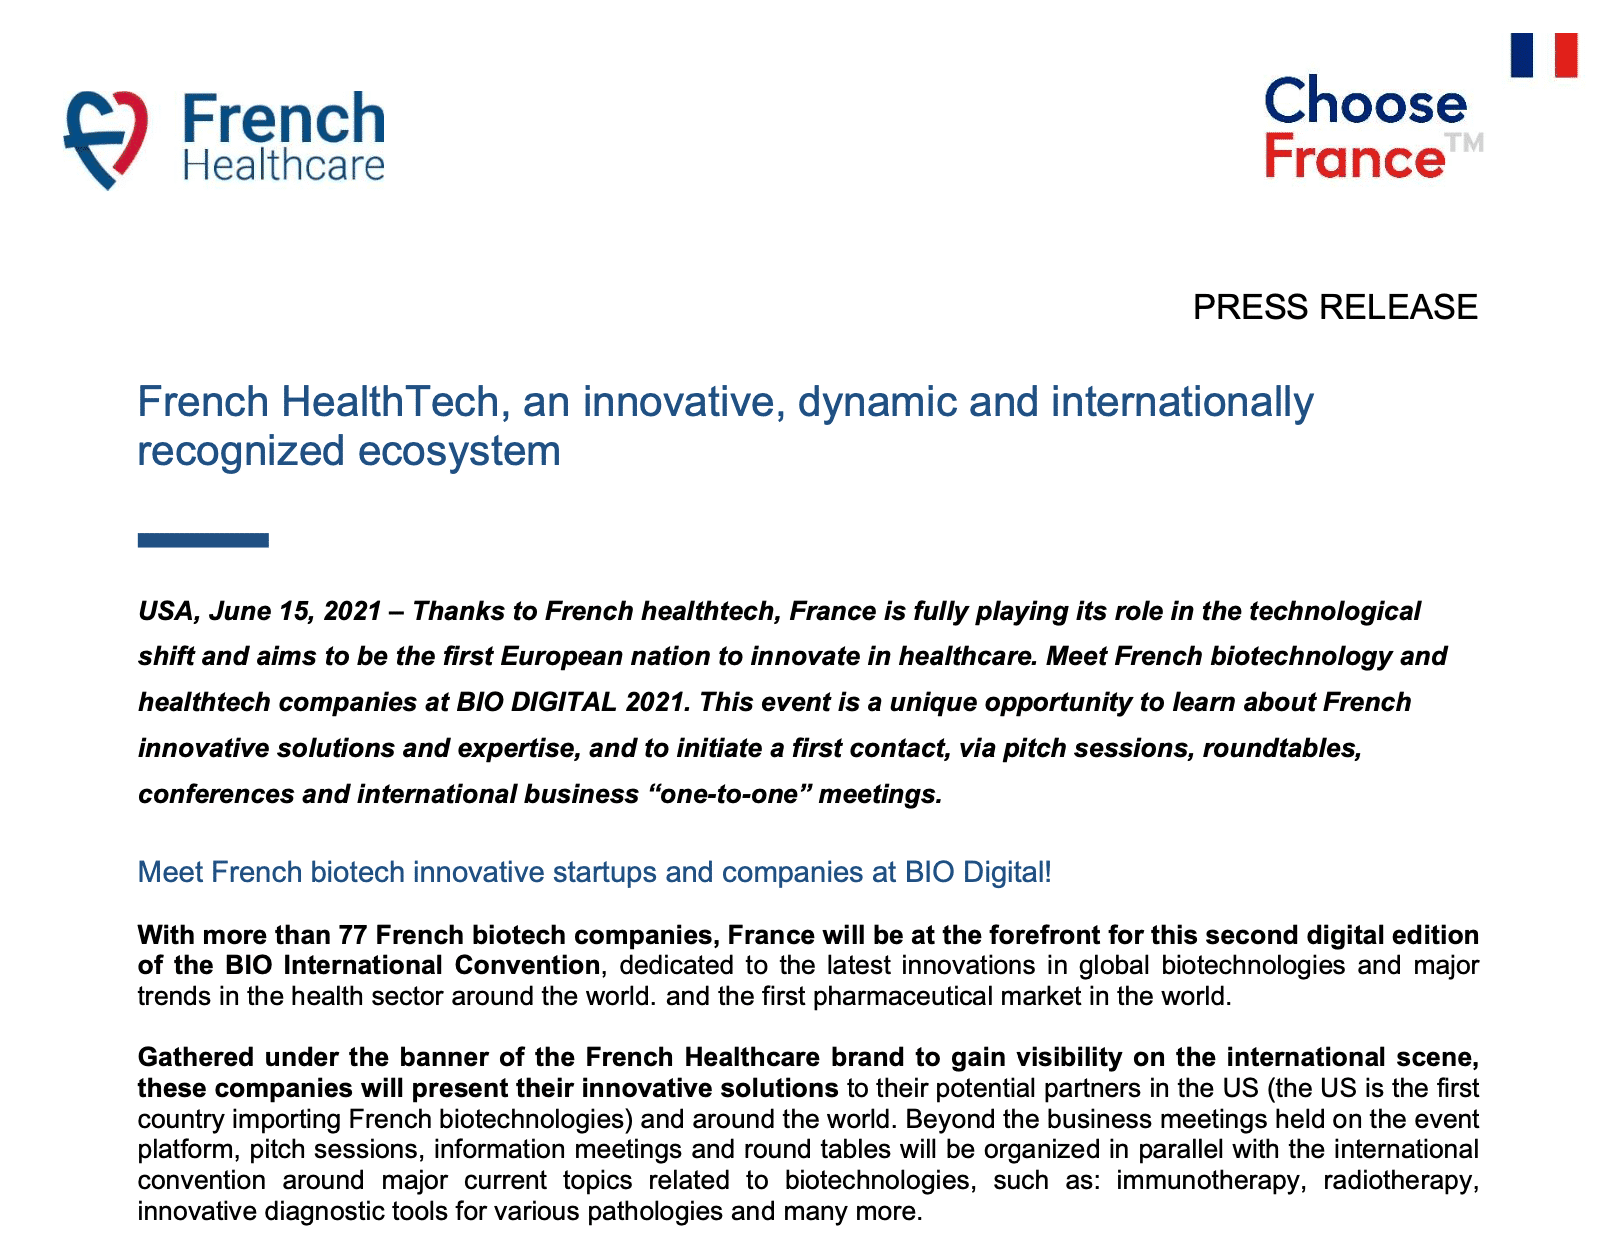 French HealthTech, an innovative, dynamic and internationally recognized ecosystem (2021) - Business France